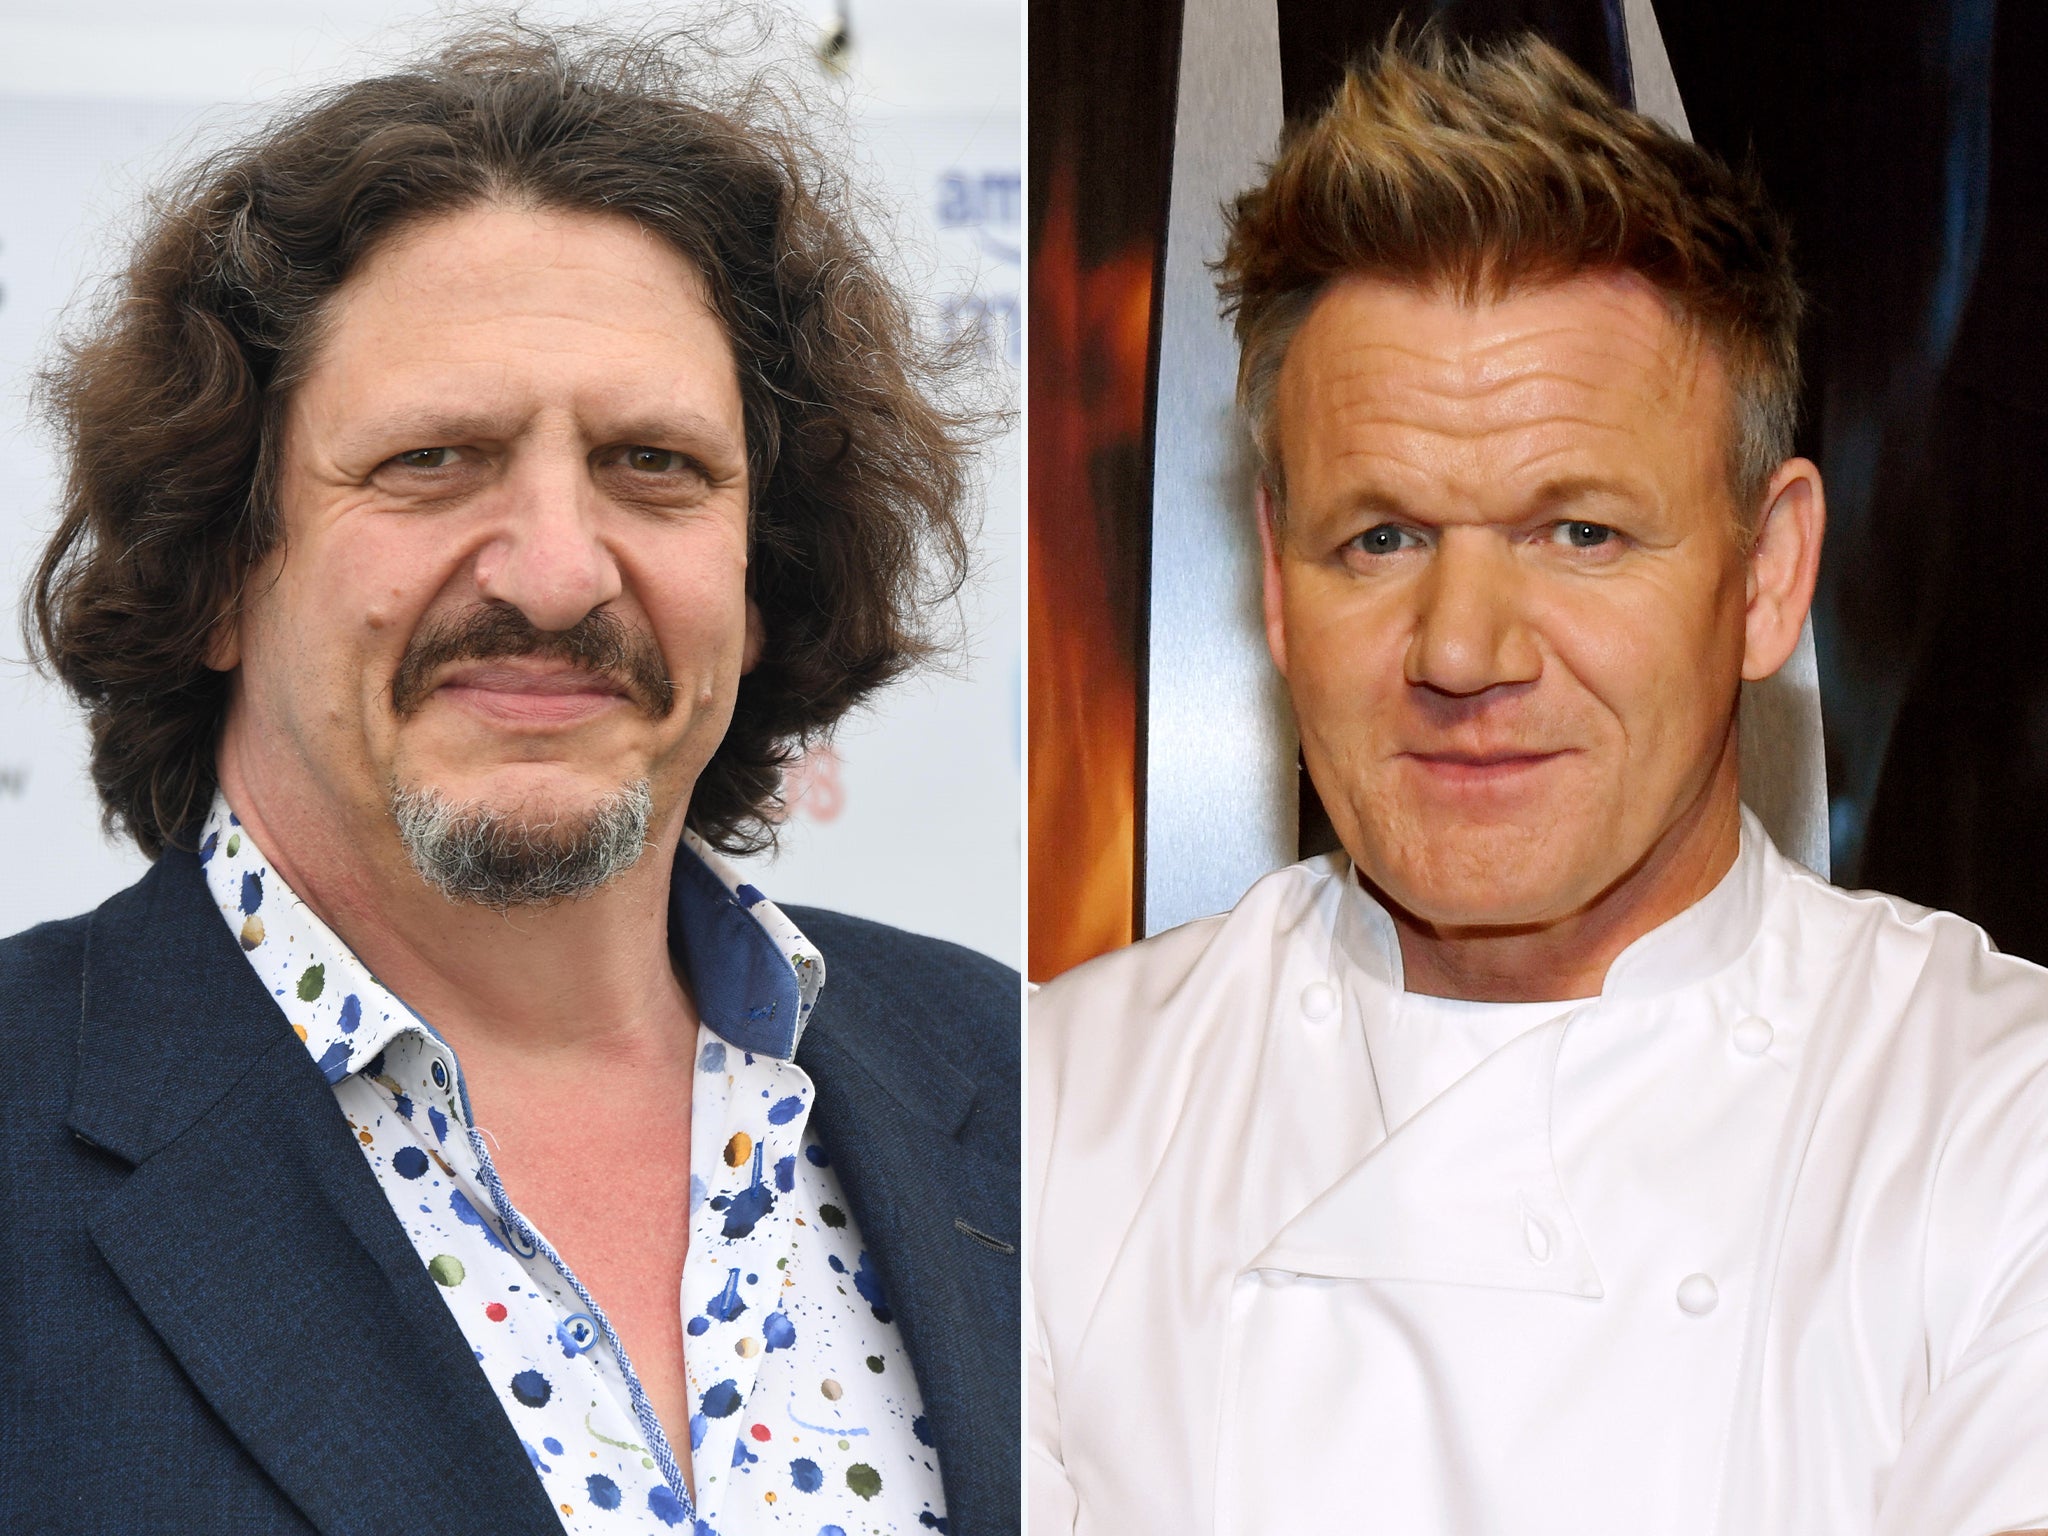 Jay Rayner (left) and Gordon Ramsay (right) are both respected figures in the world of food